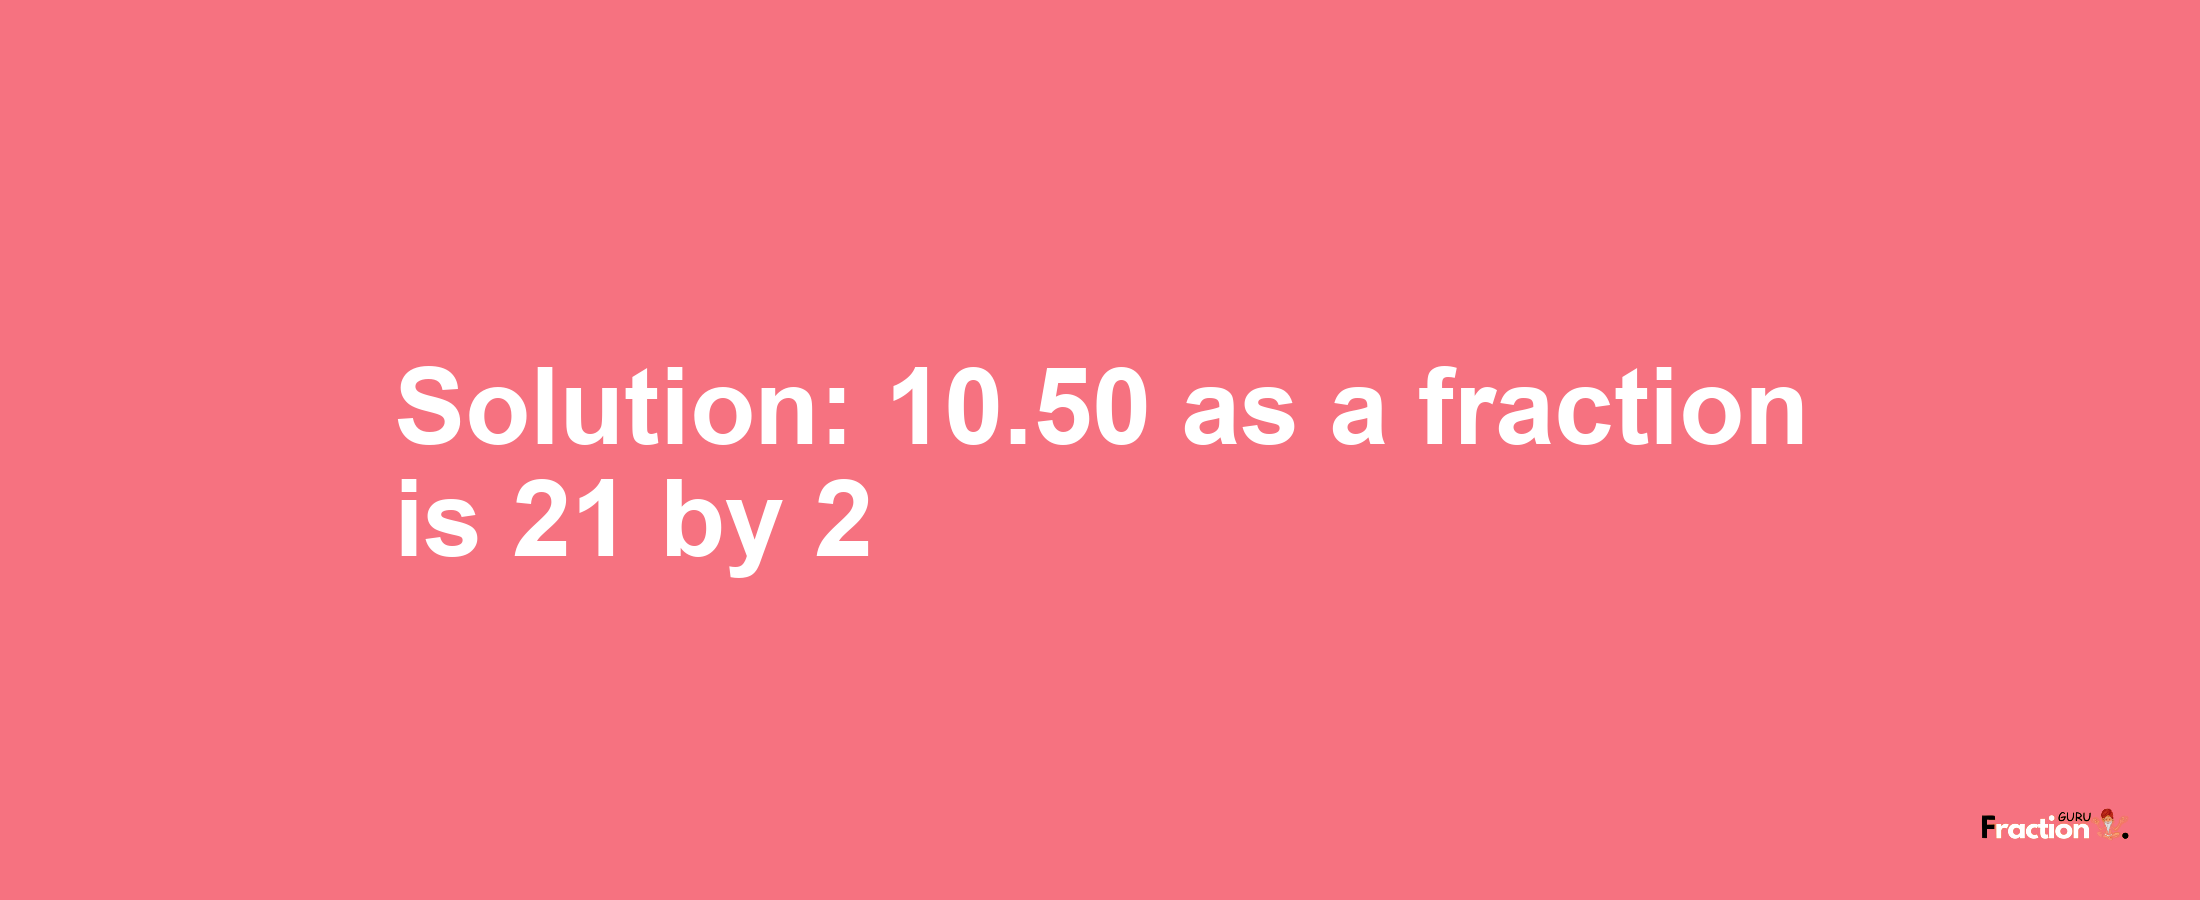 Solution:10.50 as a fraction is 21/2